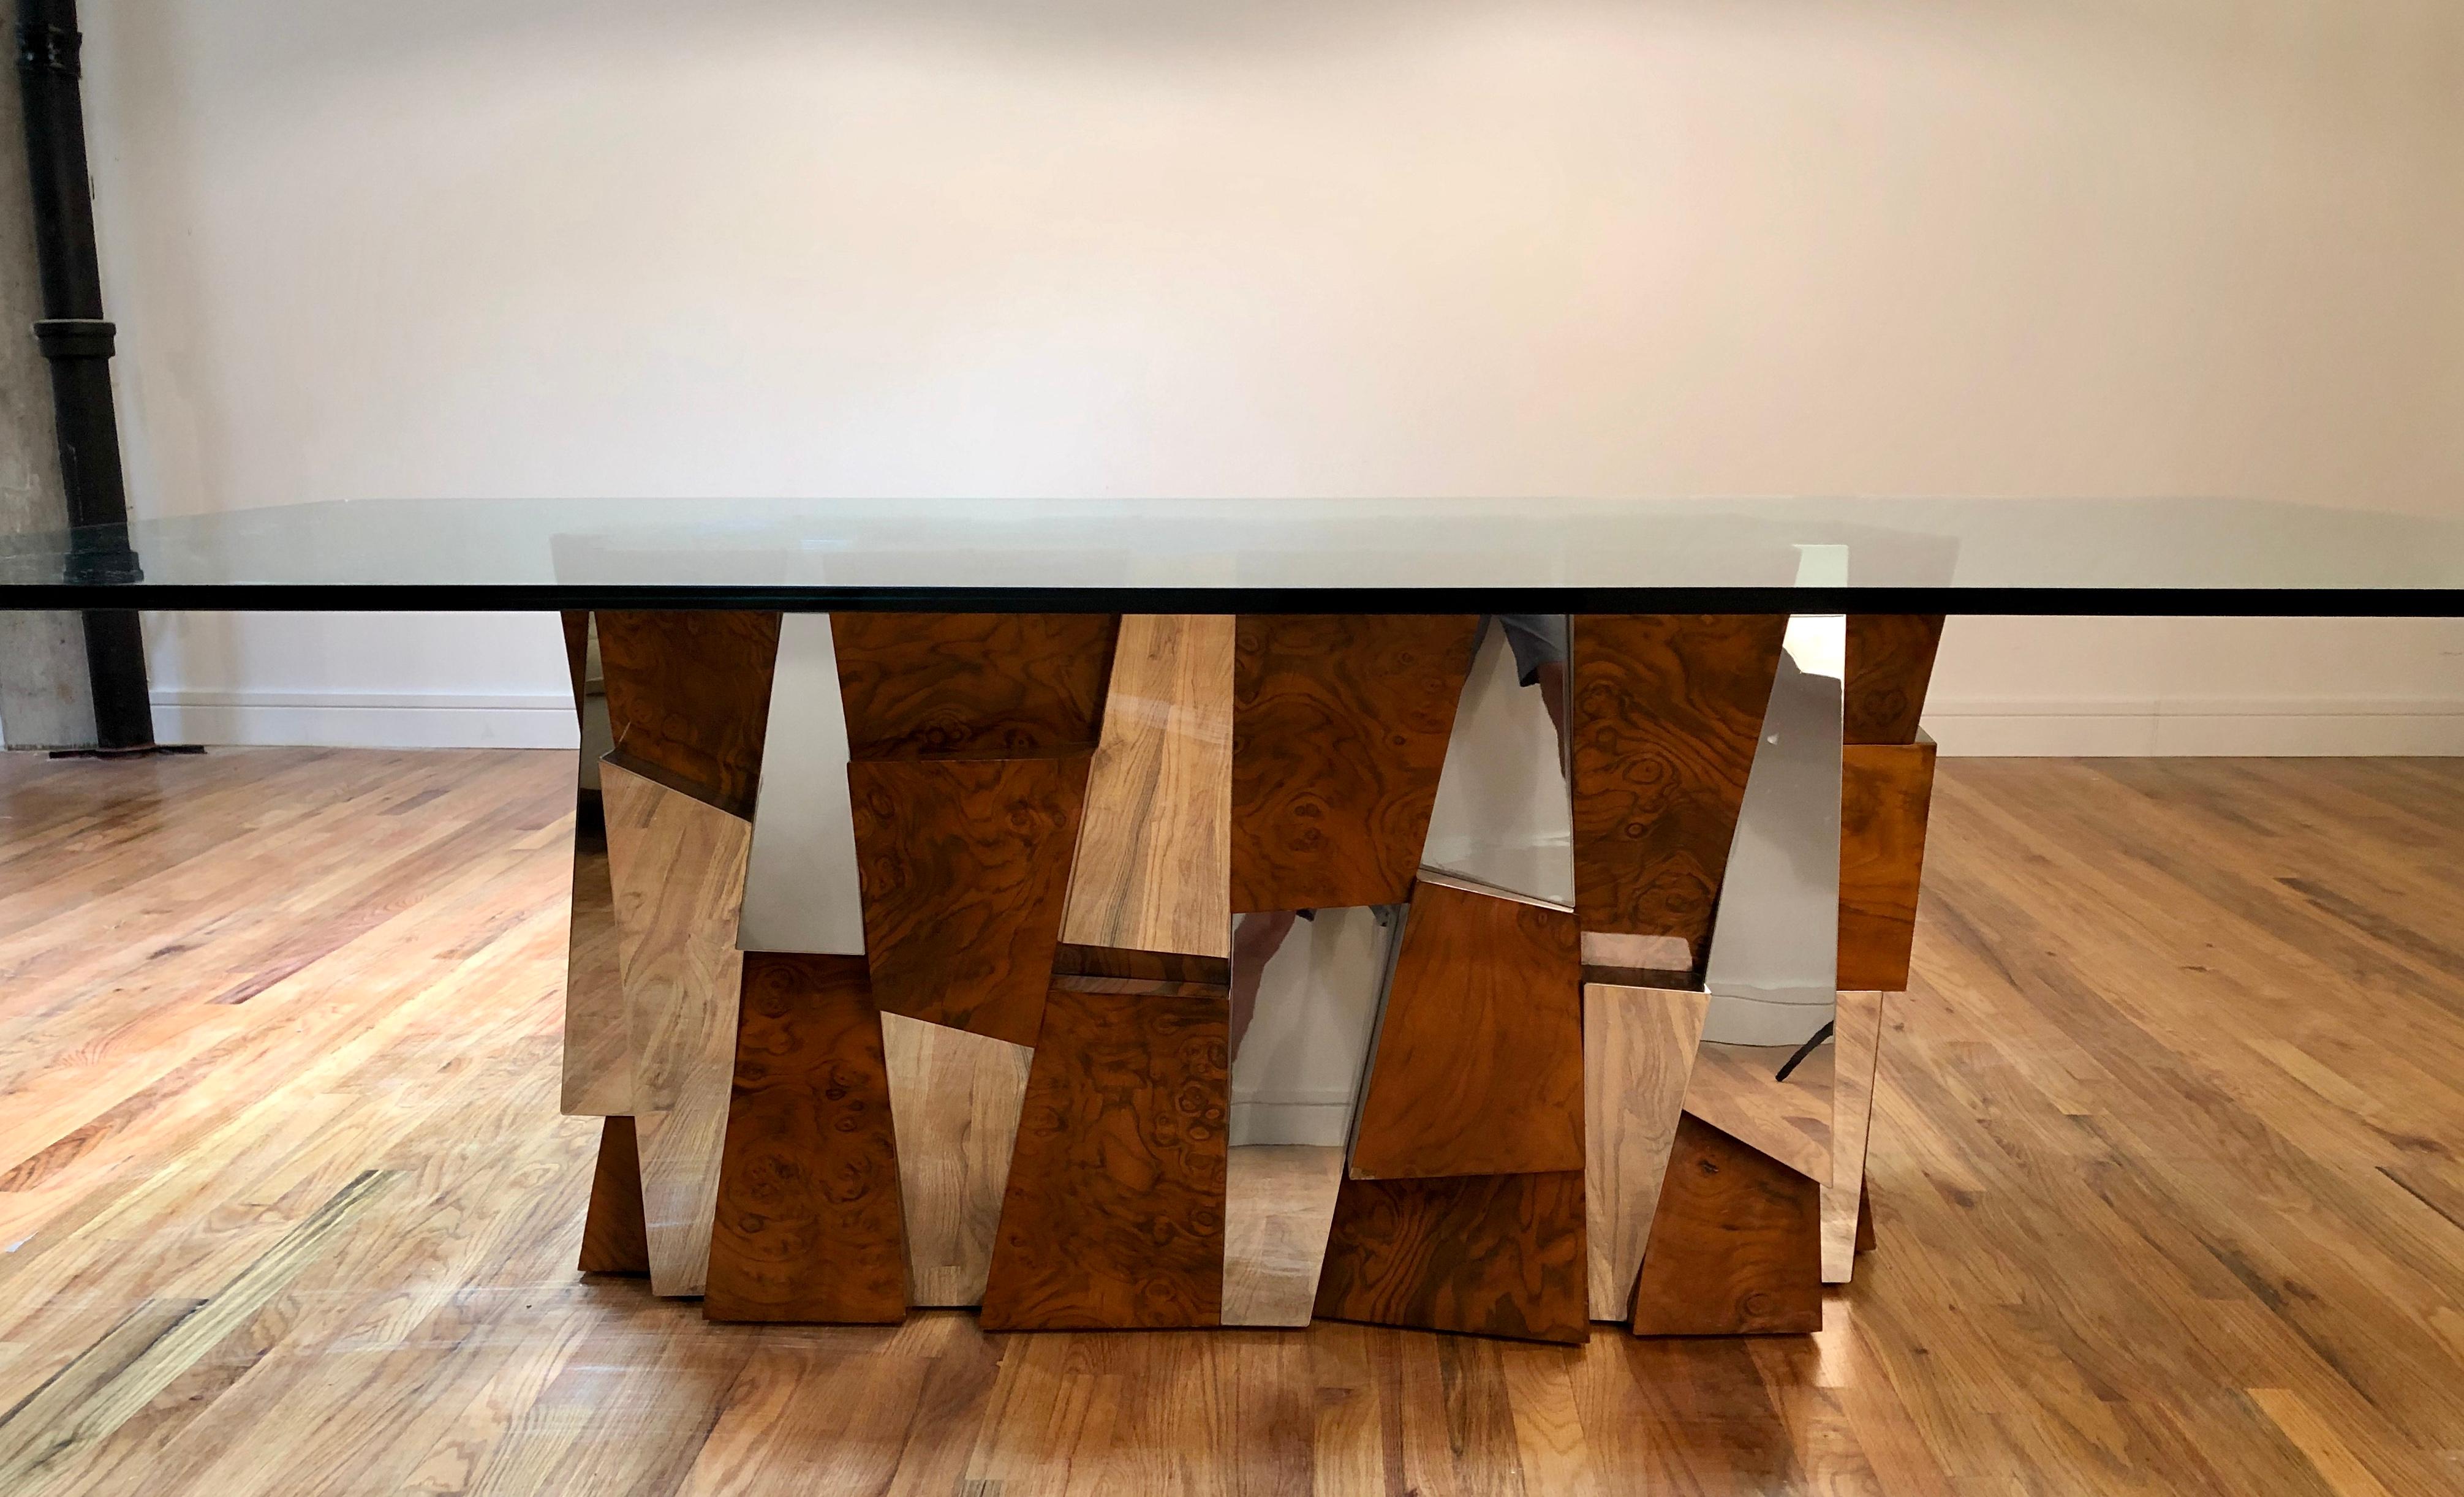 Paul Evans faceted burl wood and mirrored chrome sculptural dining table base with a glass top for seating up to 8. Made by Directional, 1970s.
   